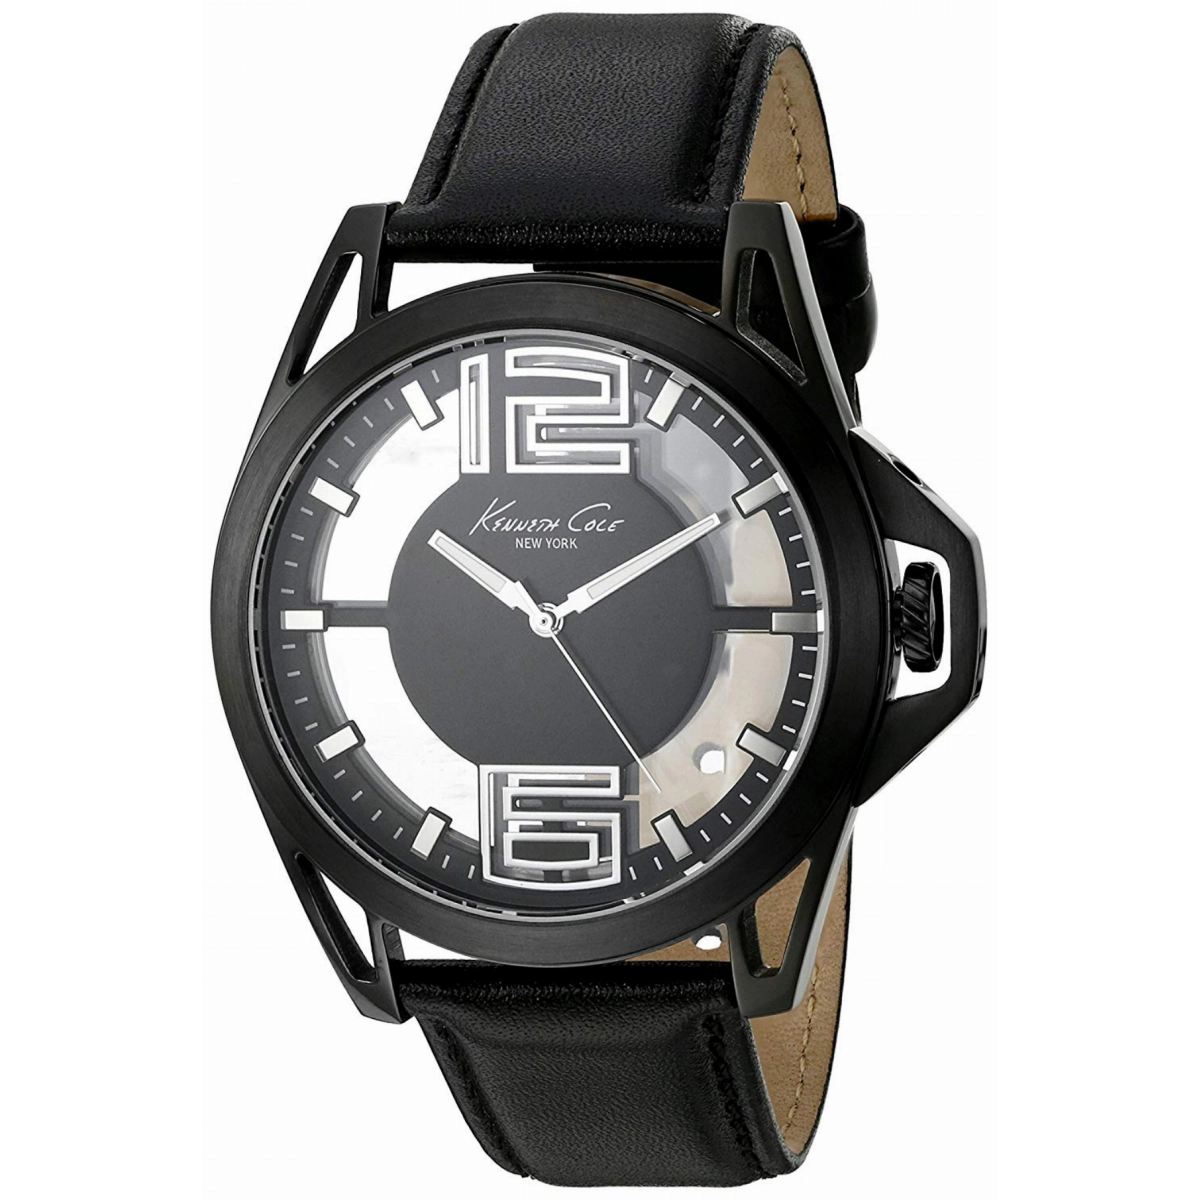 WATCH ANALOG MENS KENNETH COLE 10022526